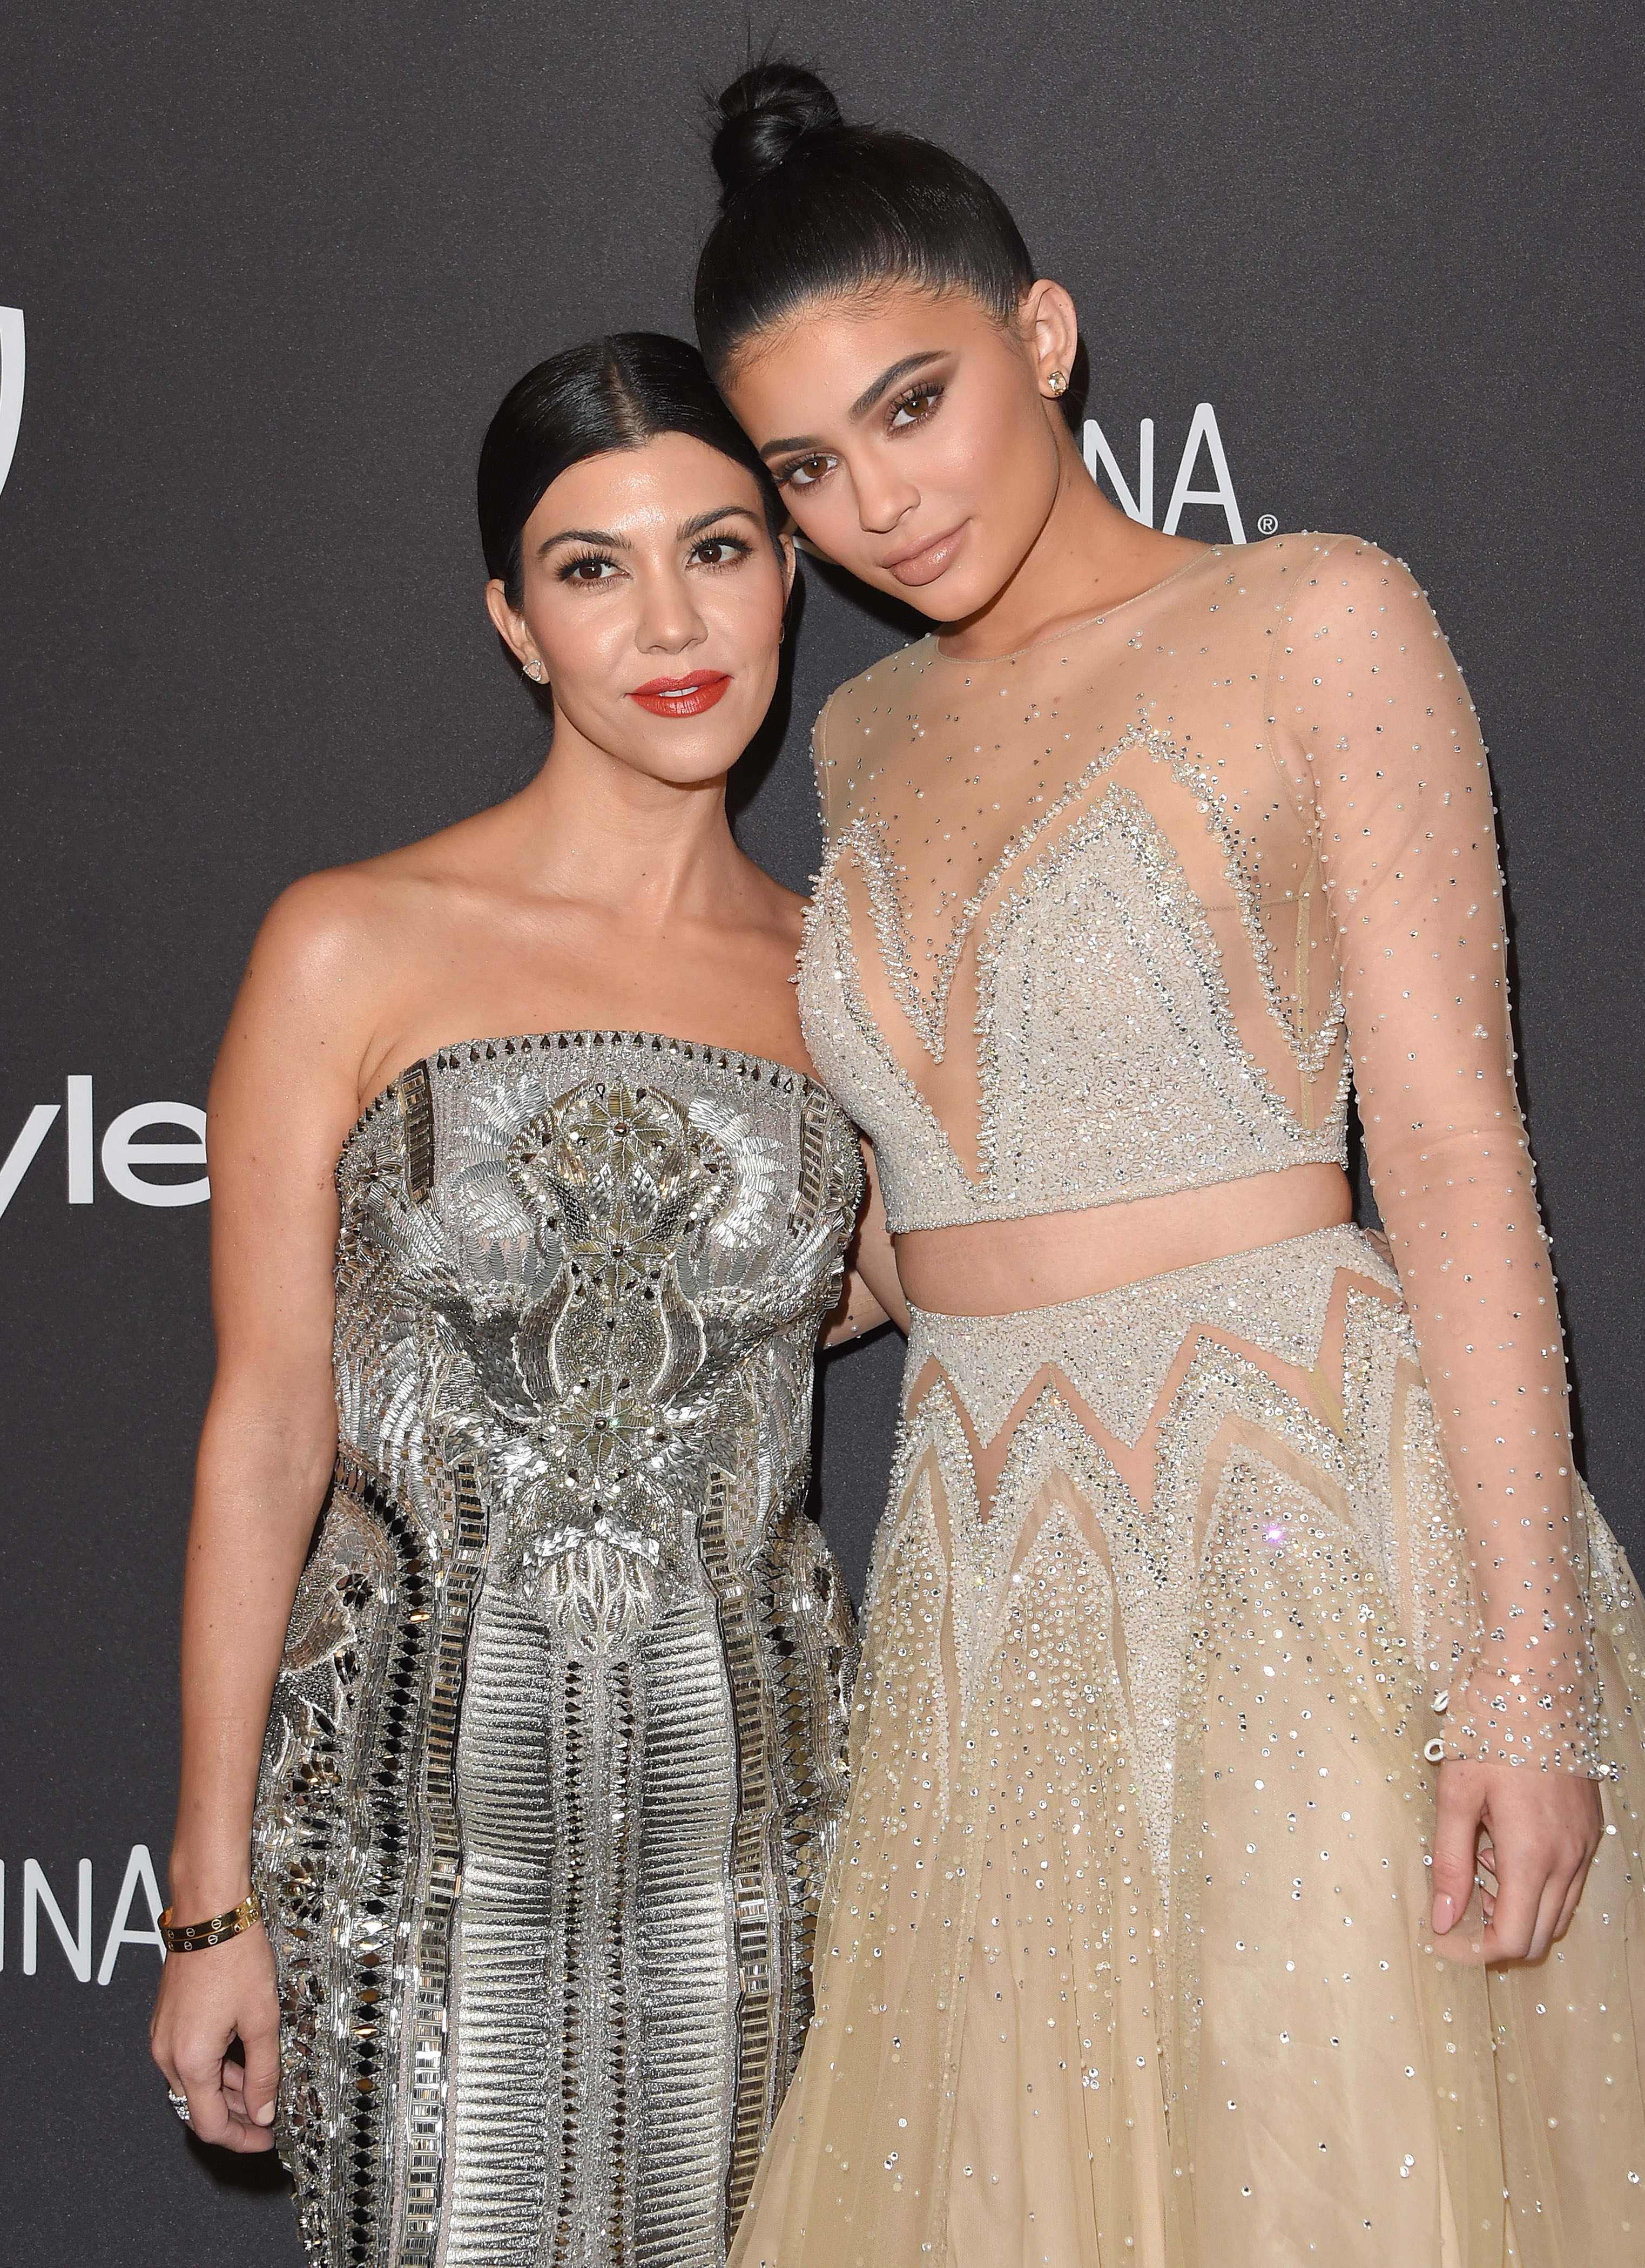 Close-up of Kylie and Kourtney at a media event